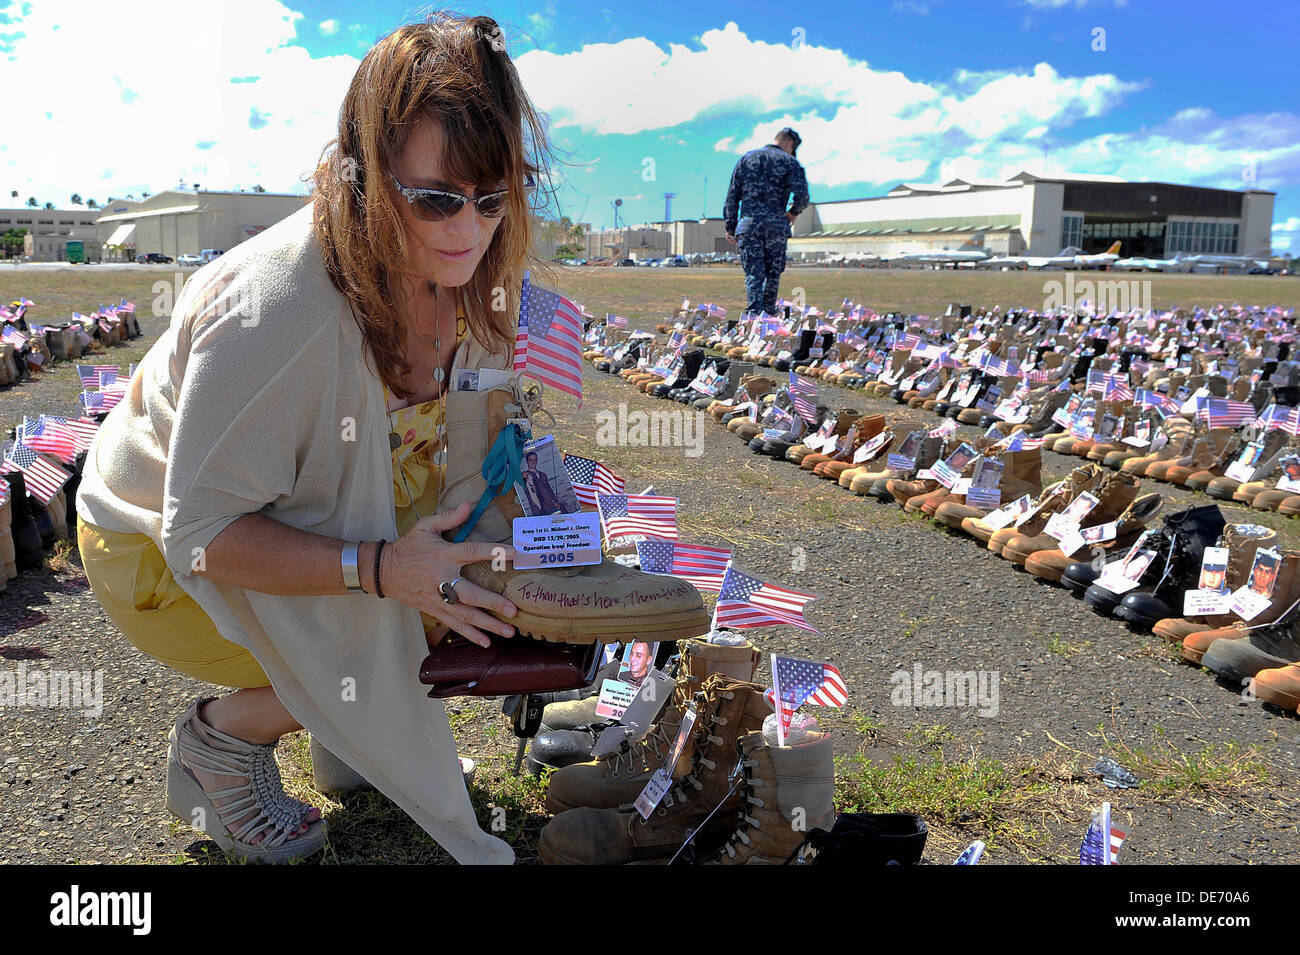 Shannon Cleary, sister of Army 1st Lt. Michael J. Cleary, who lost his life on during Operation Iraqi freedom displays her brother's boot during a memorial made from the 6,000 boots with the names and pictures of those killed in the Iraq and Afghan Wars on display on Ford Island Joint Base Pearl Harbor-Hickam September 11, 2013 in Pearl Harbor, Hawaii. Stock Photo